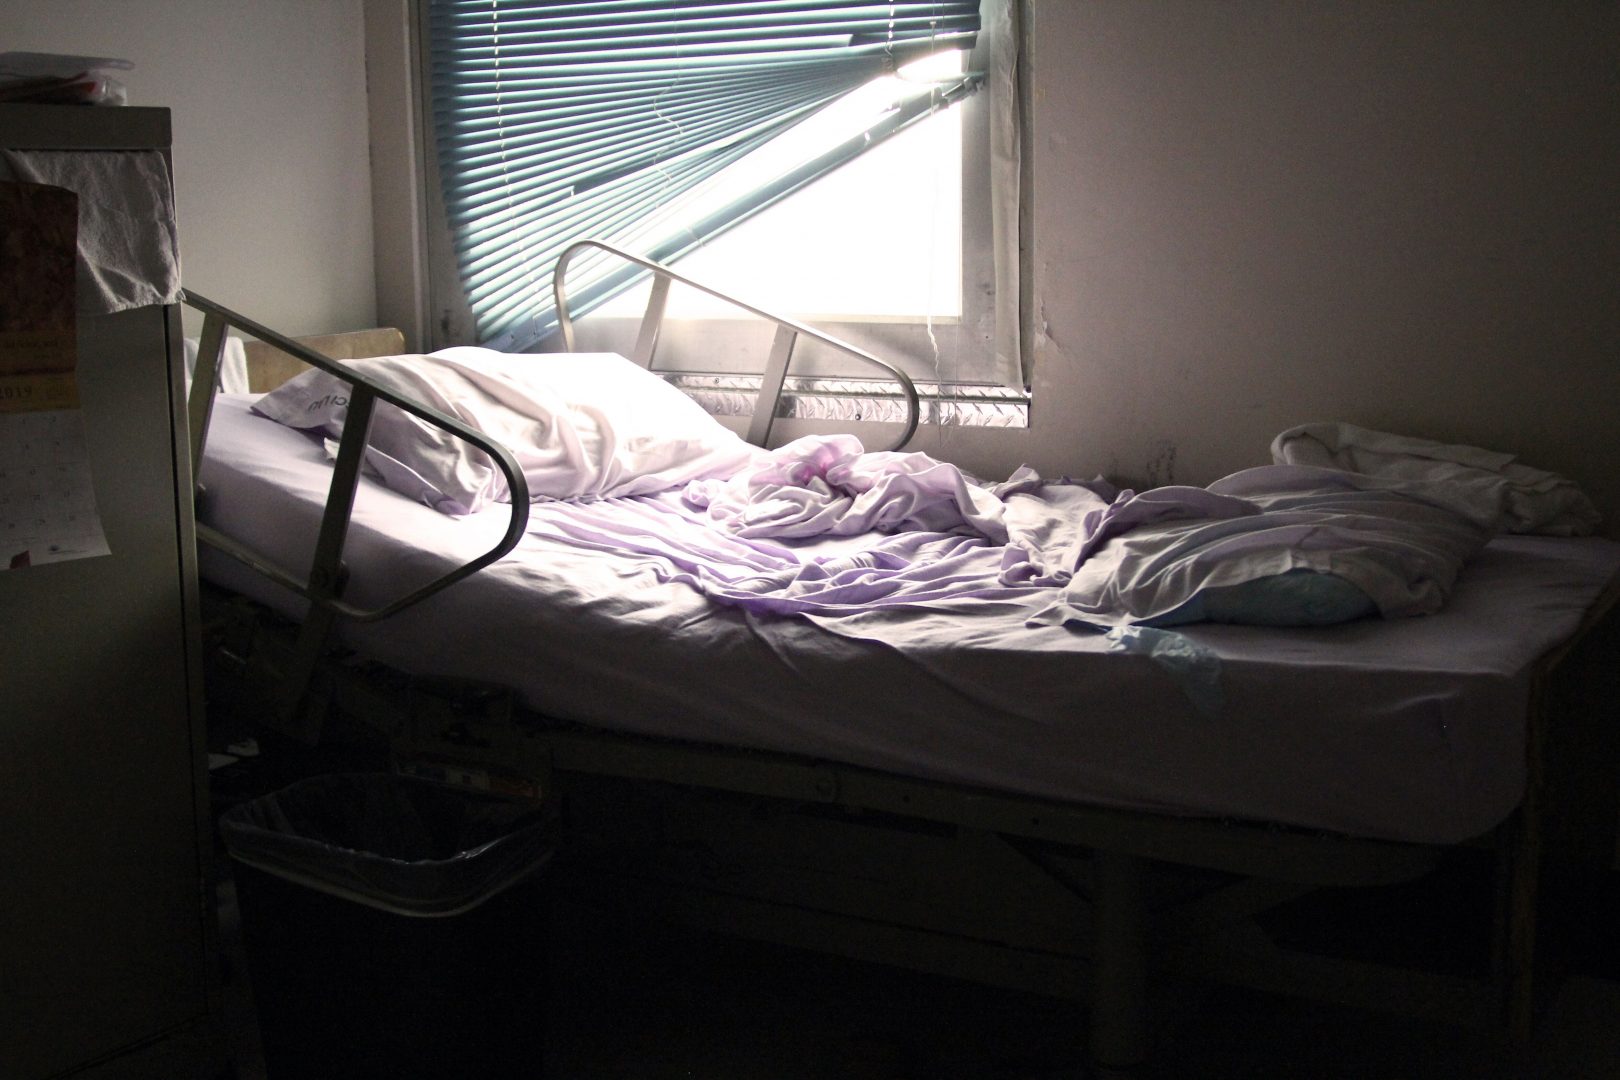 A bed at State Correctional Institution at Laurel Highlands in November 2019. Four inmates at the Laurel Highlands facility in Somerset are currently in the hospital, and the facility reported its first death of the pandemic last week.